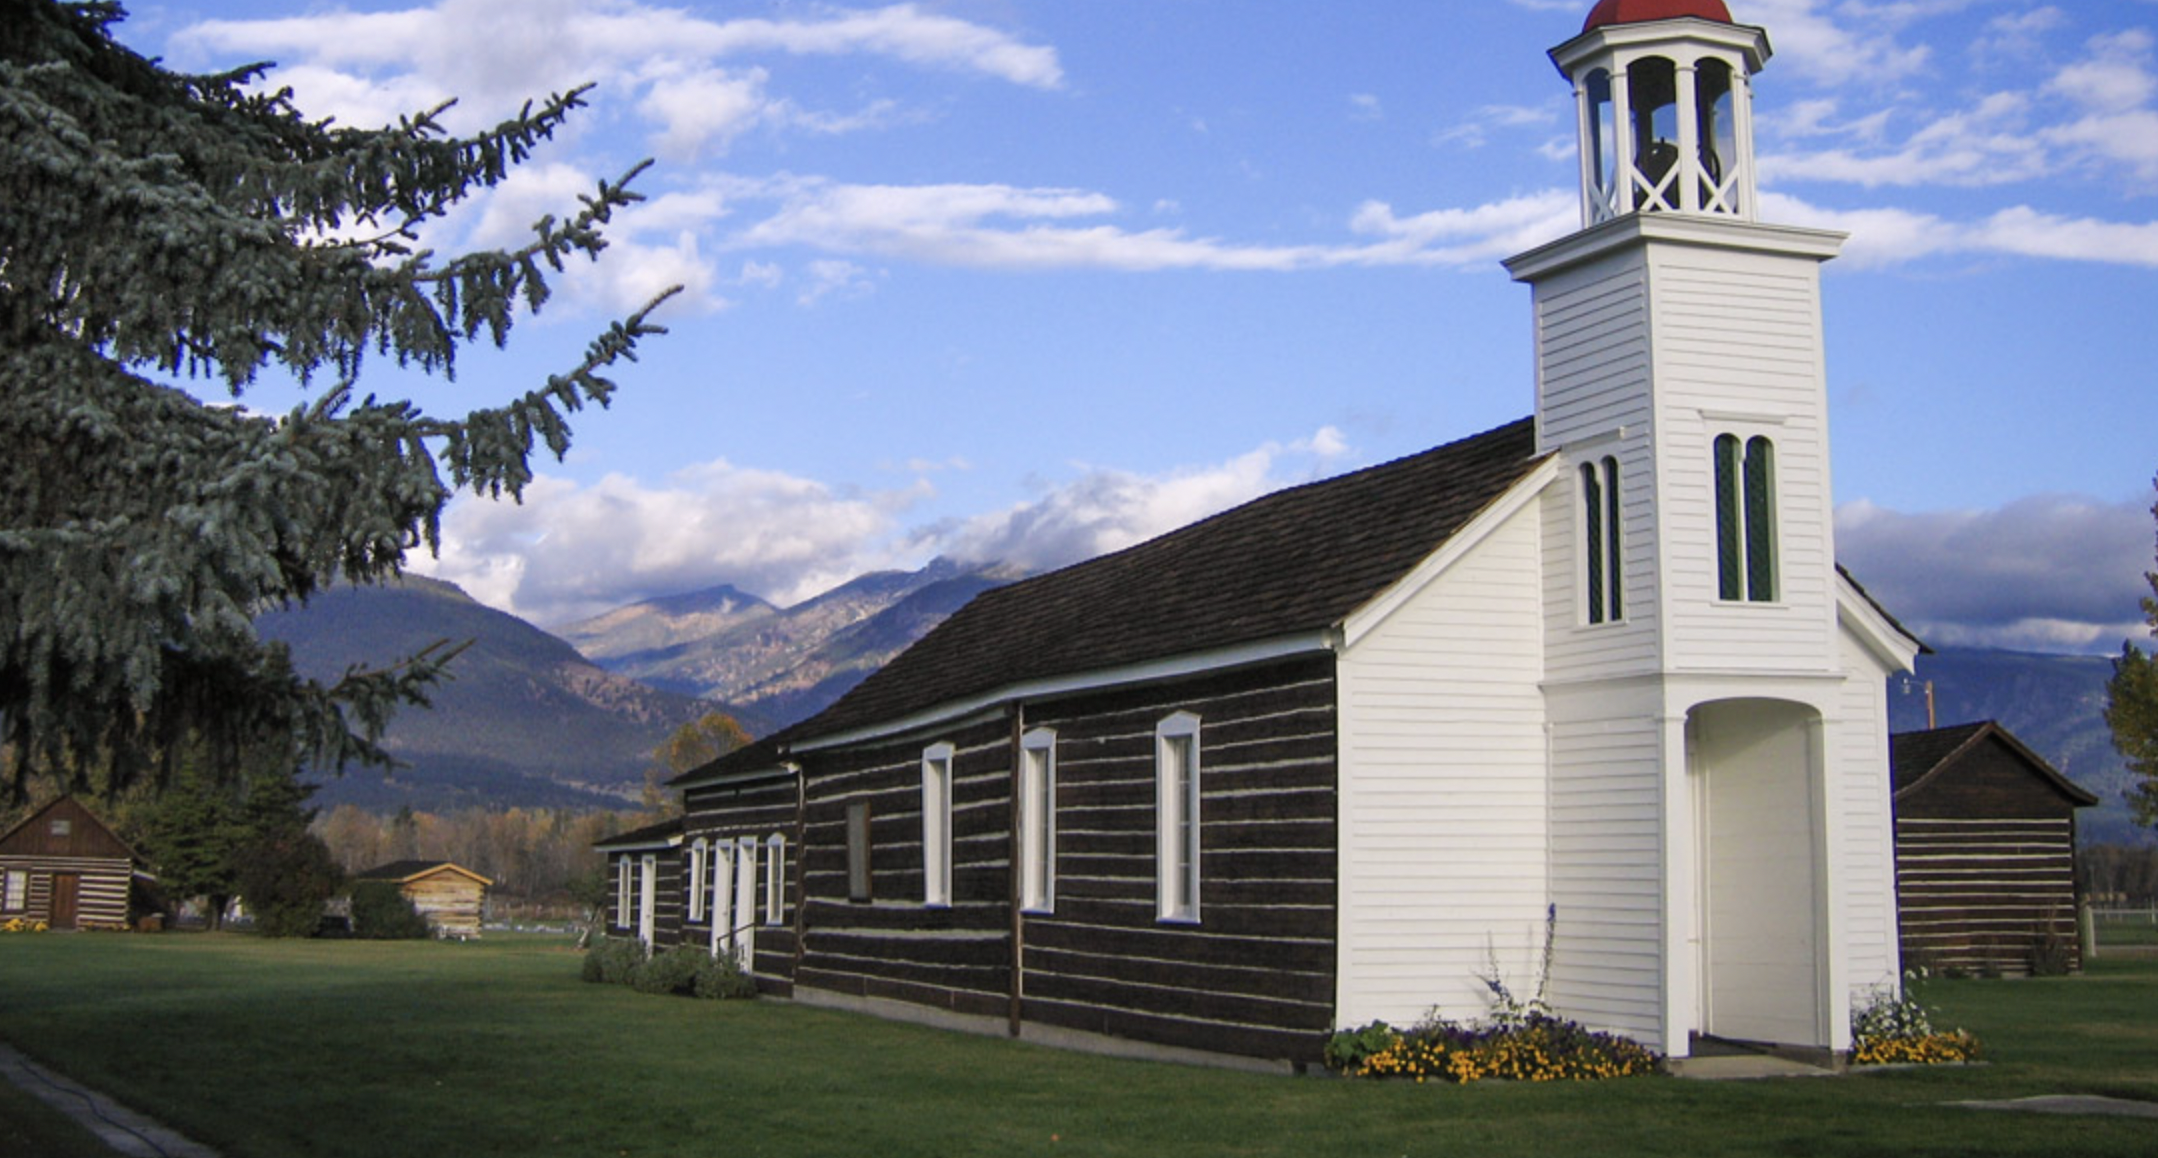 Historic St. Mary’s Mission